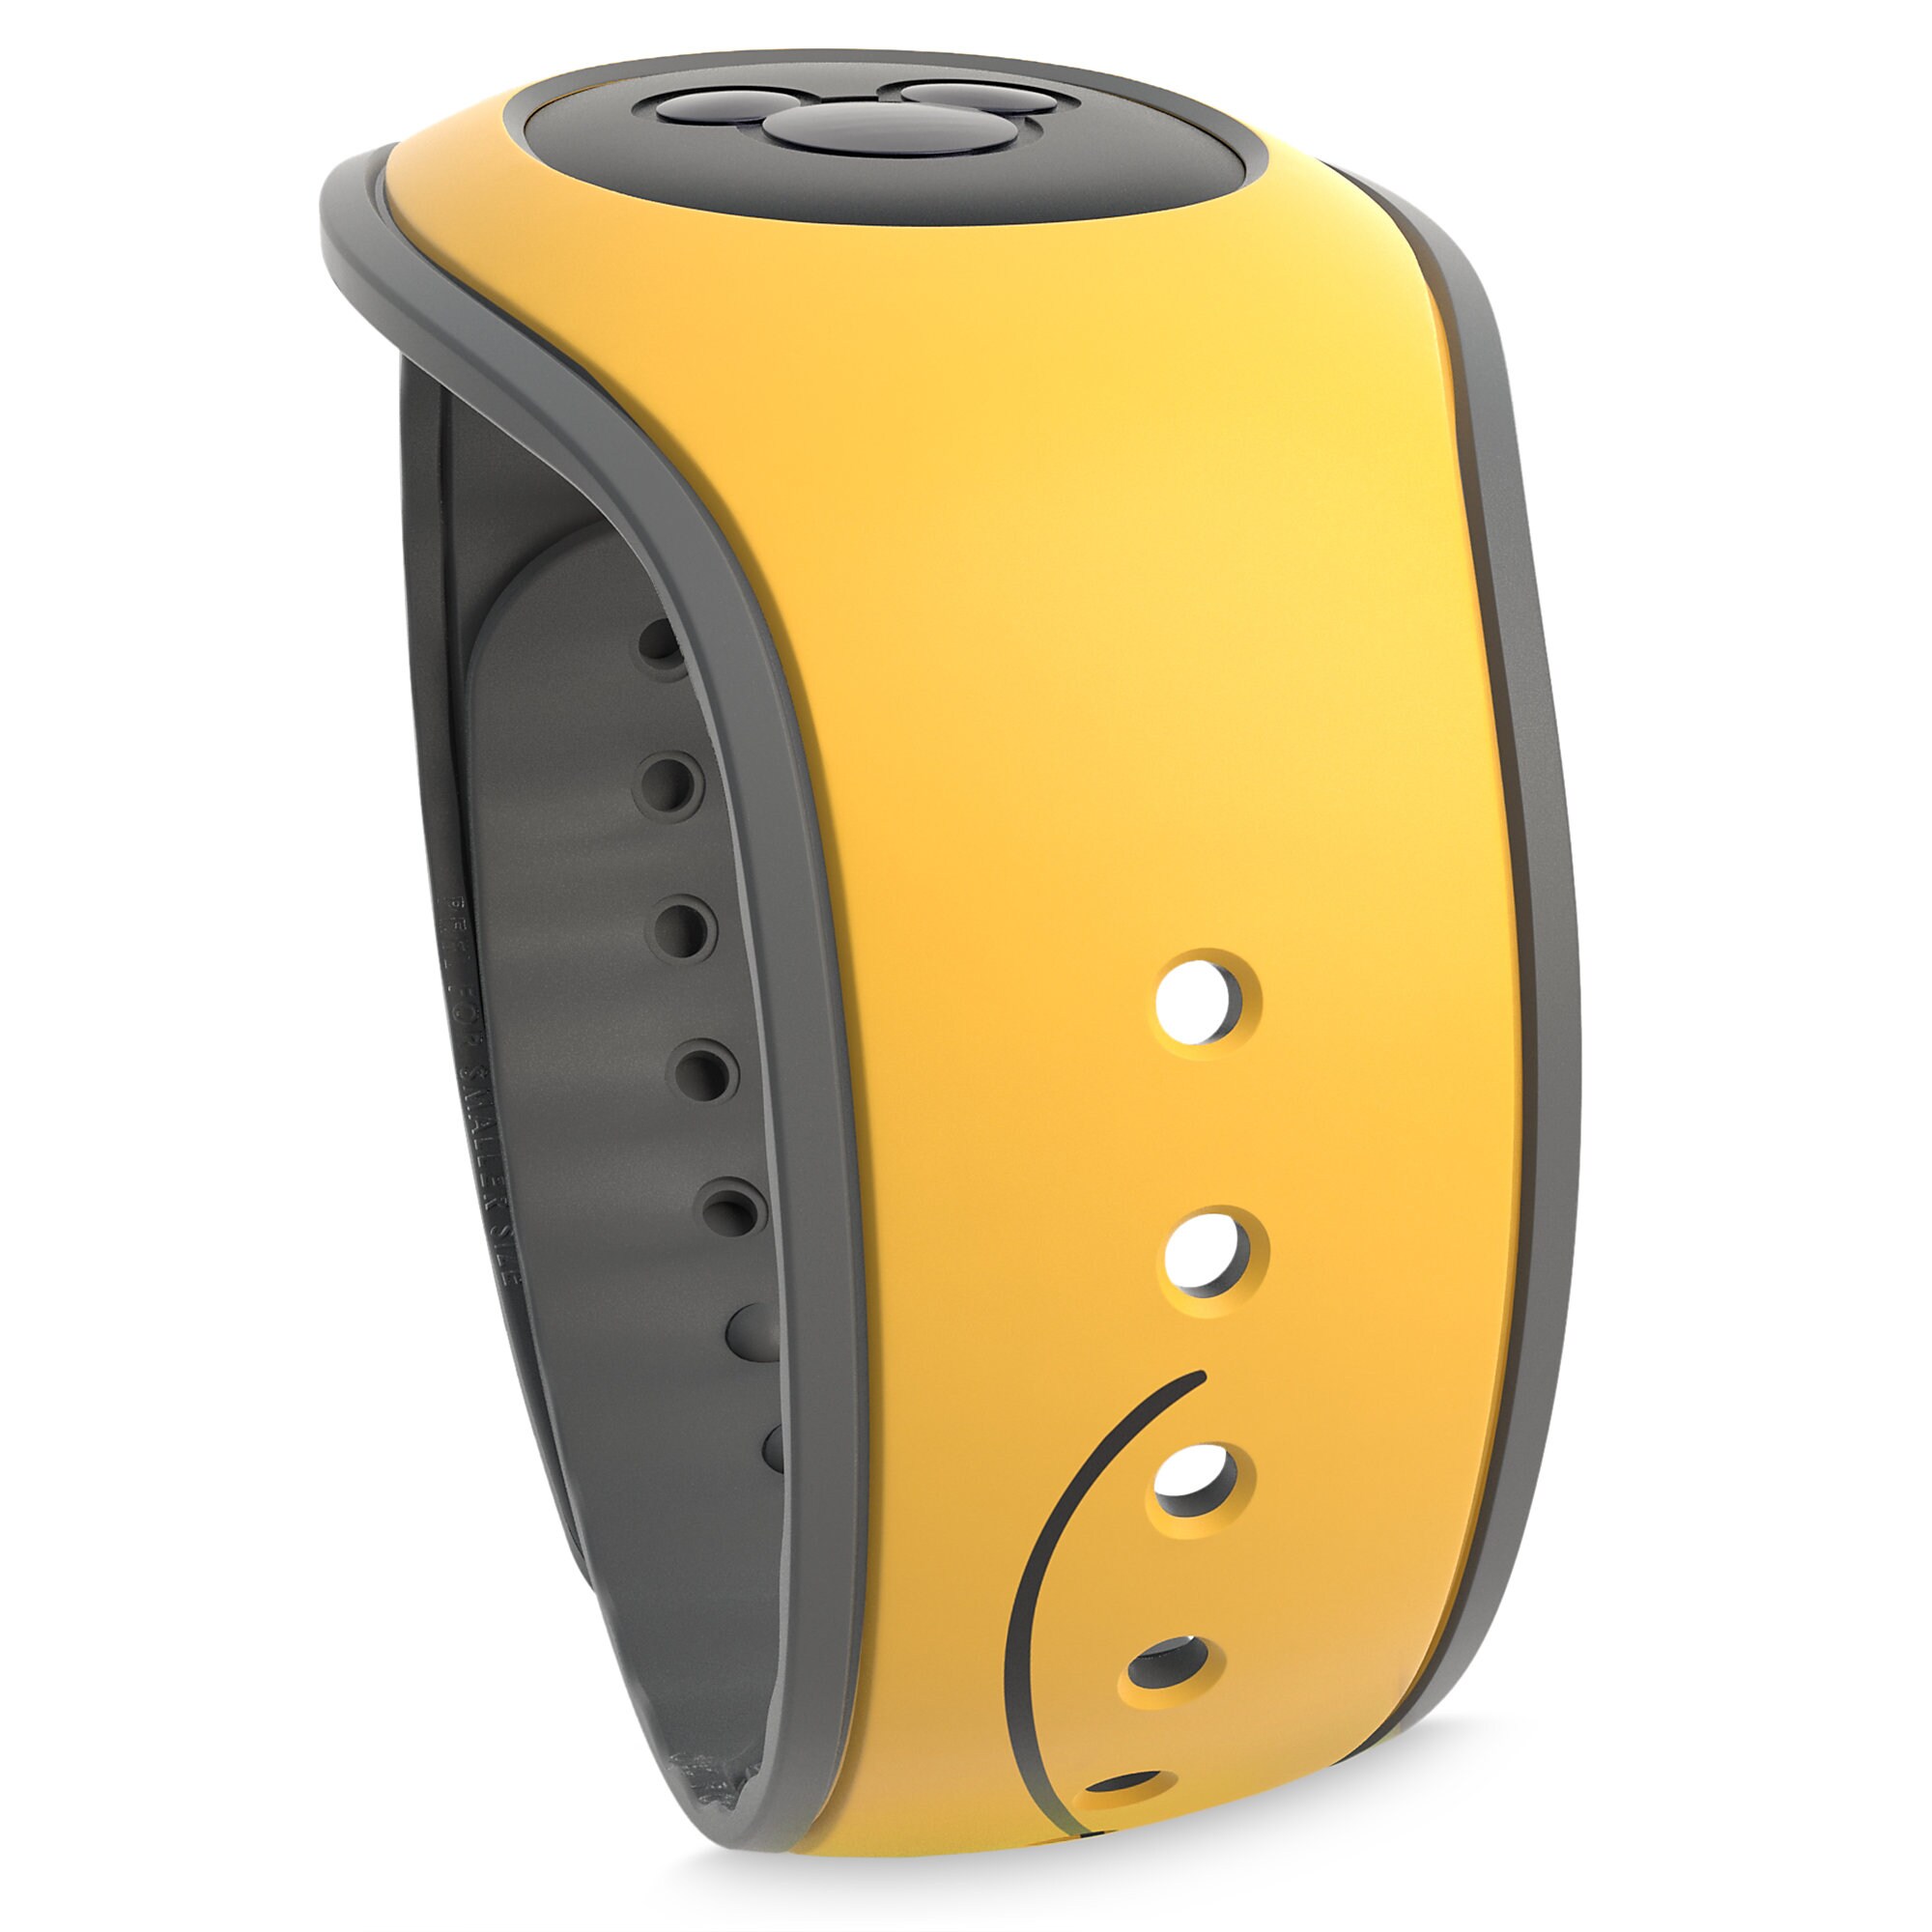 Pluto MagicBand 2 - Get Into Character